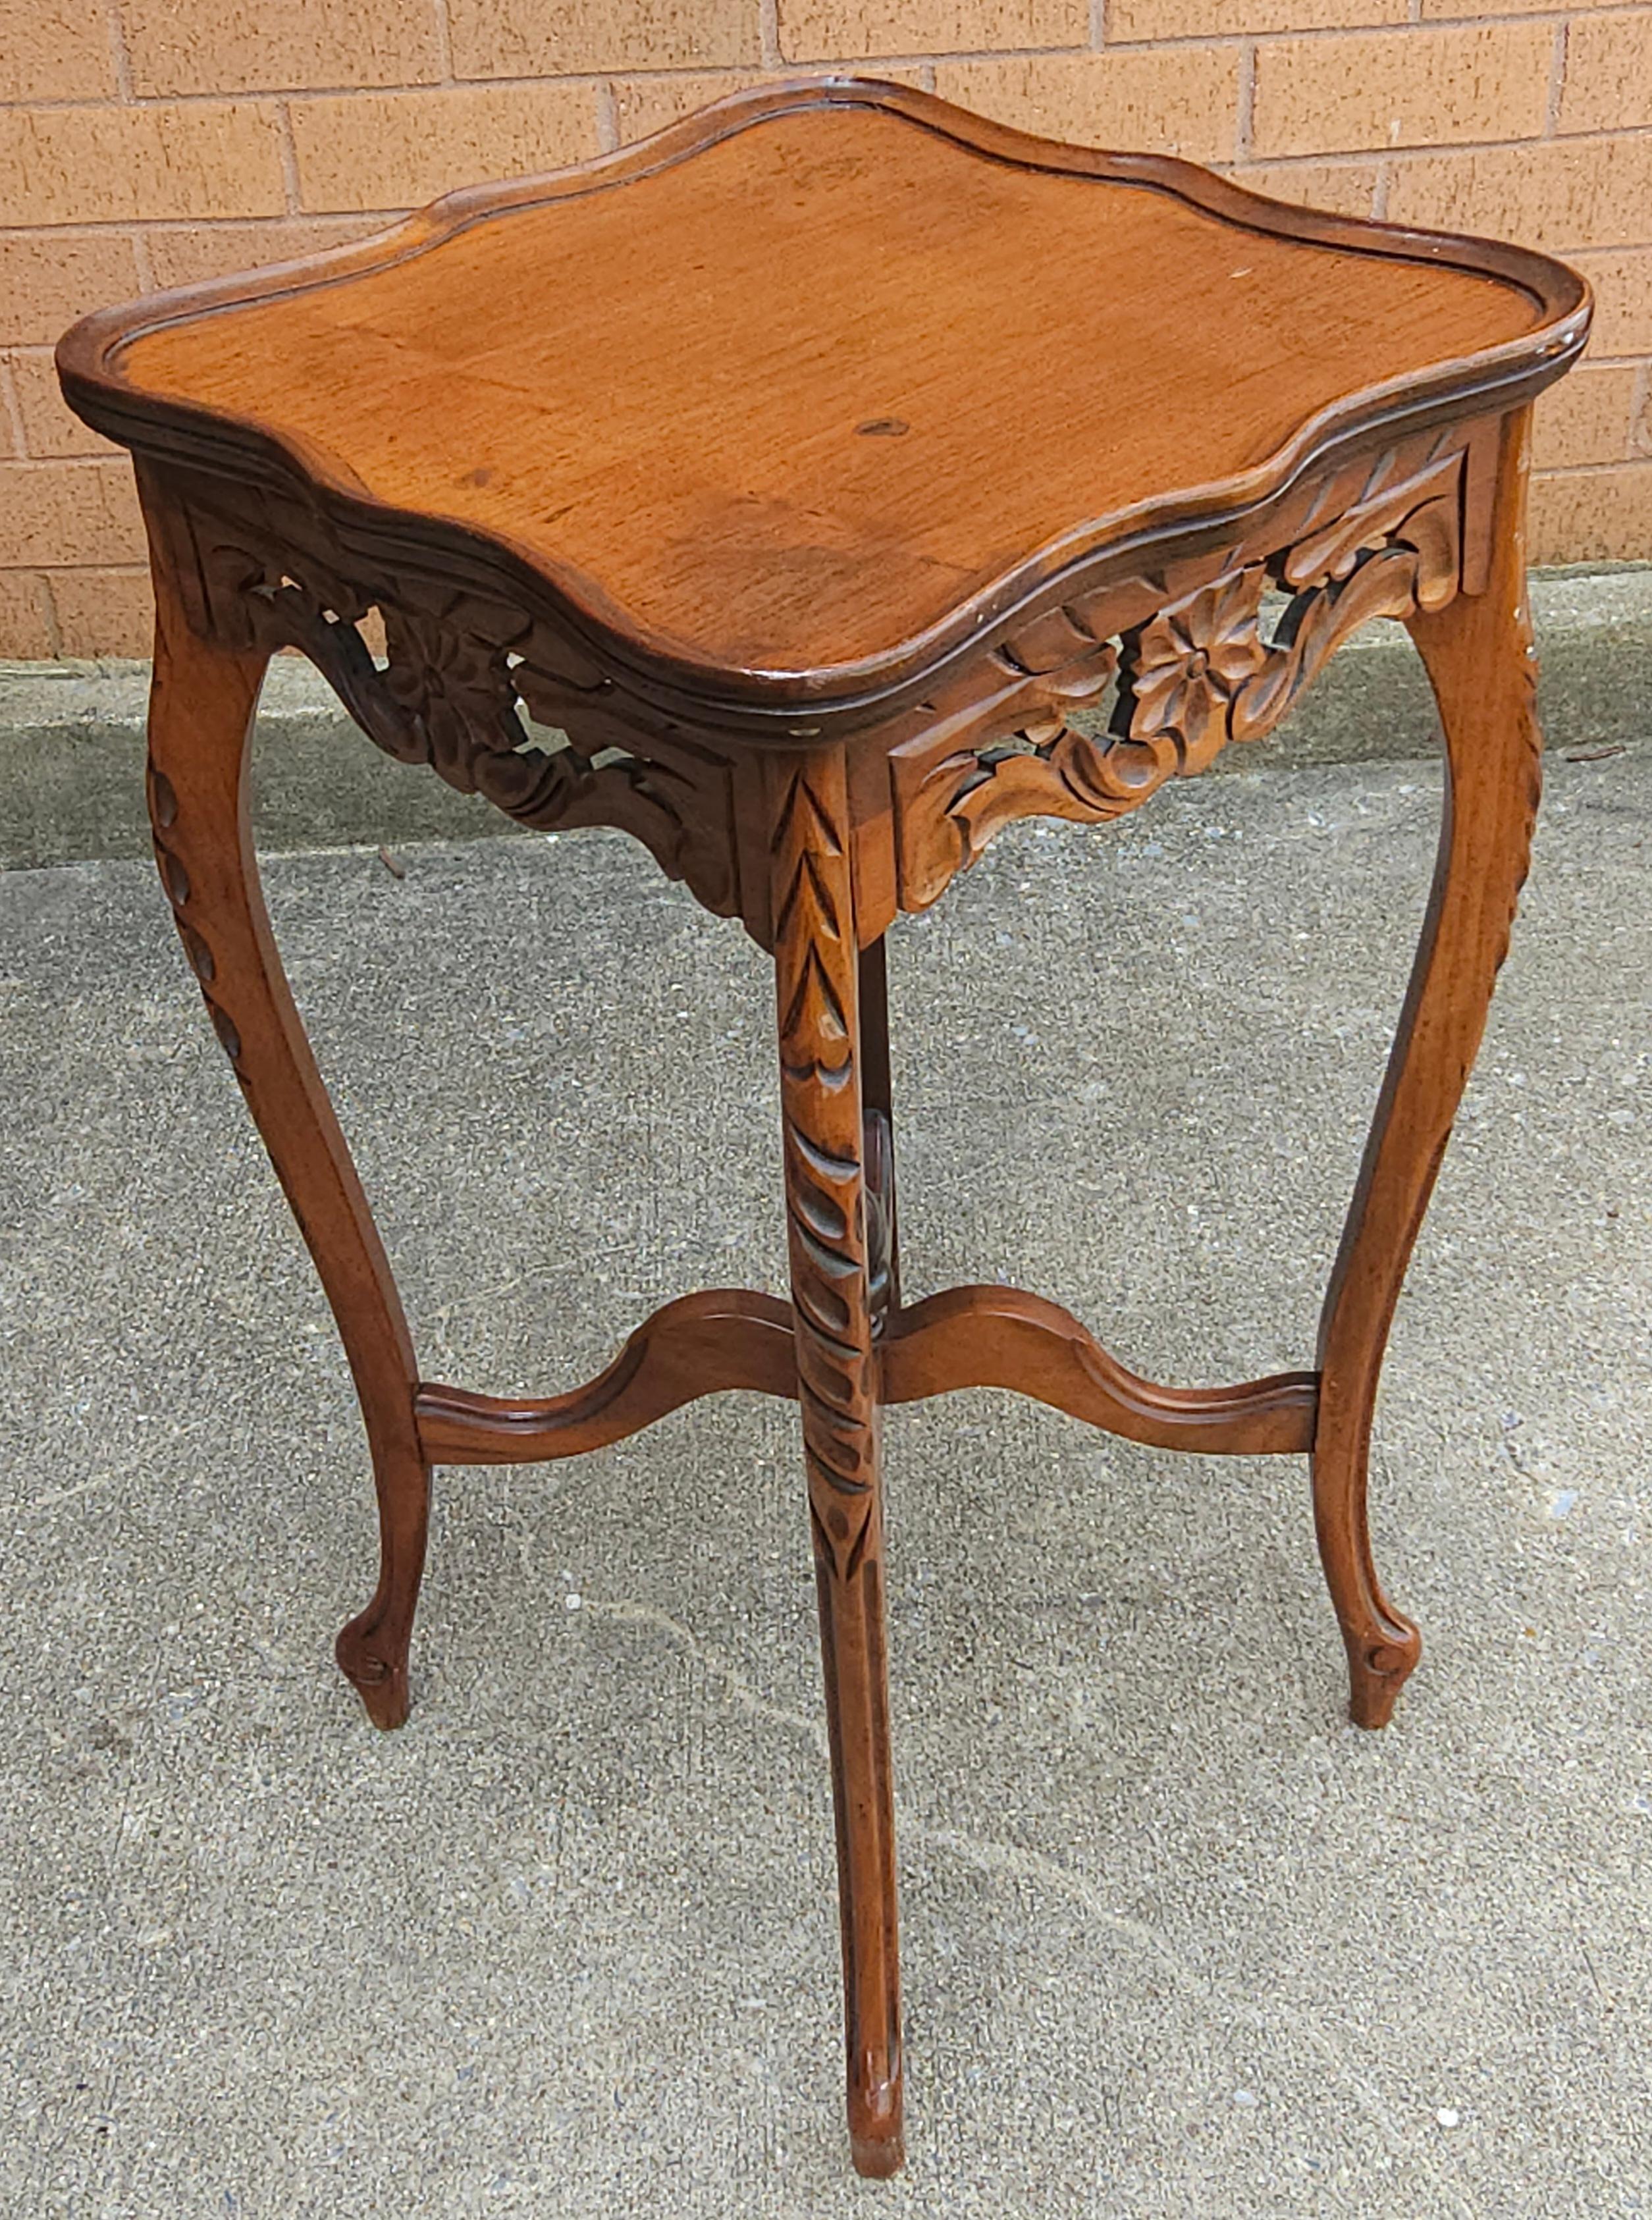 A 20th Mid Century French Empire Handcrafted, handcarved  Fruitwood Side Table with pierced galleries. 
Tables measures 14.5